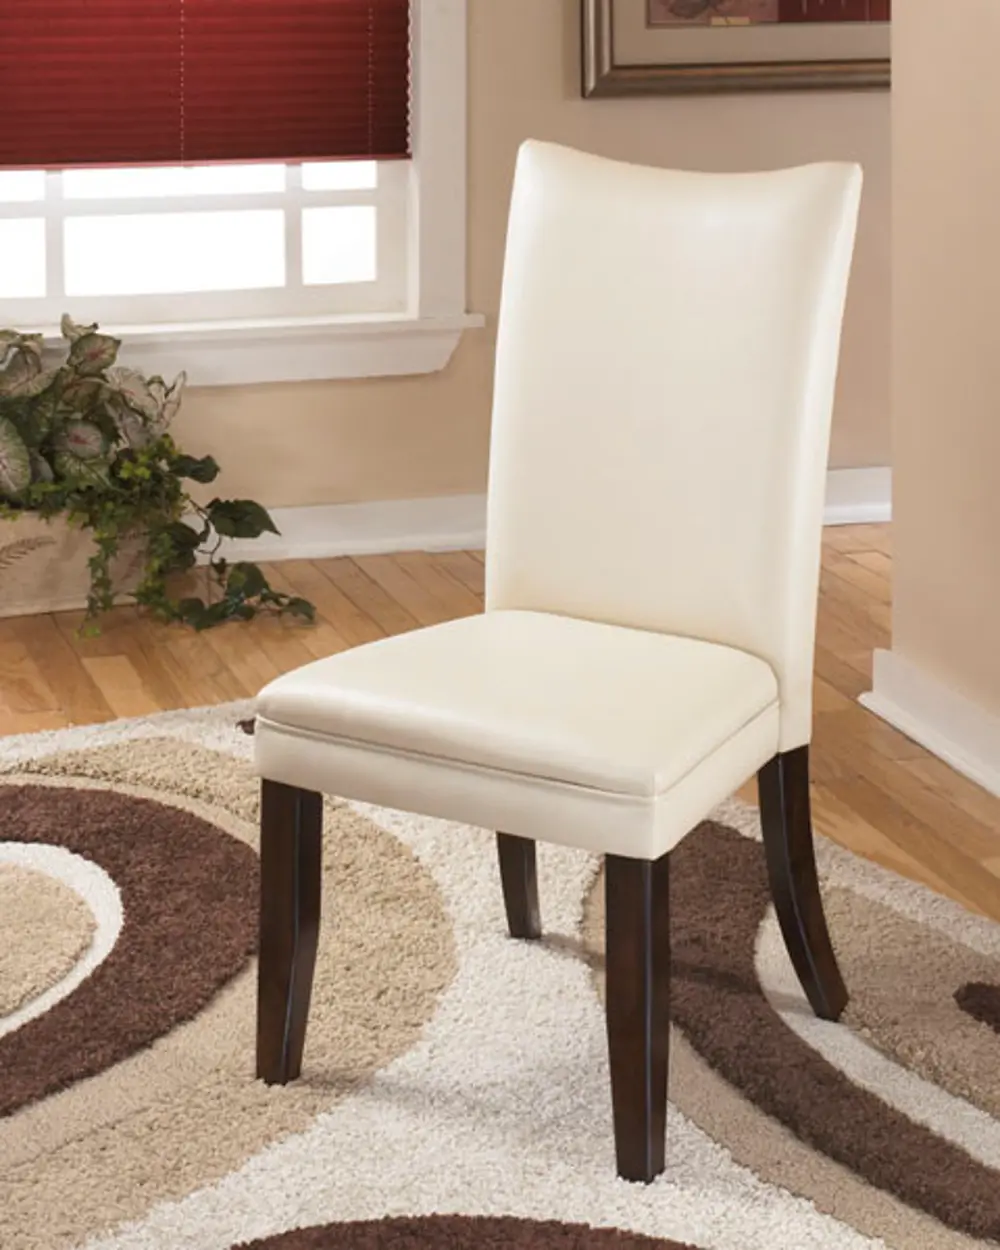 Set of 2 Contemporary White Dining Chairs - Charrell-1